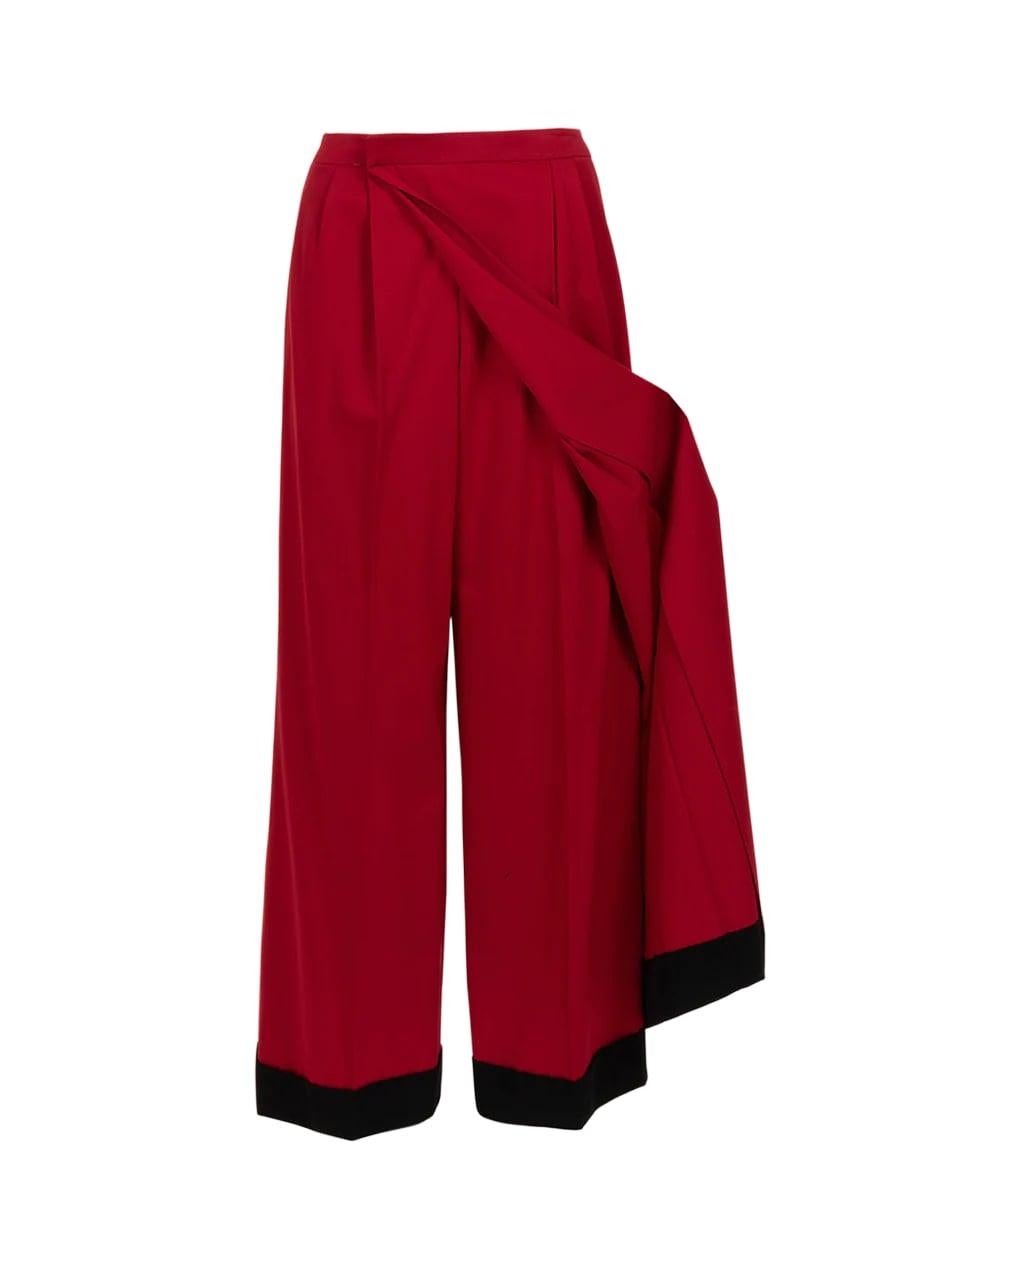 S/S 1997 Givenchy Long Red Jacket and Wrap Trouser Set In Excellent Condition In North Hollywood, CA